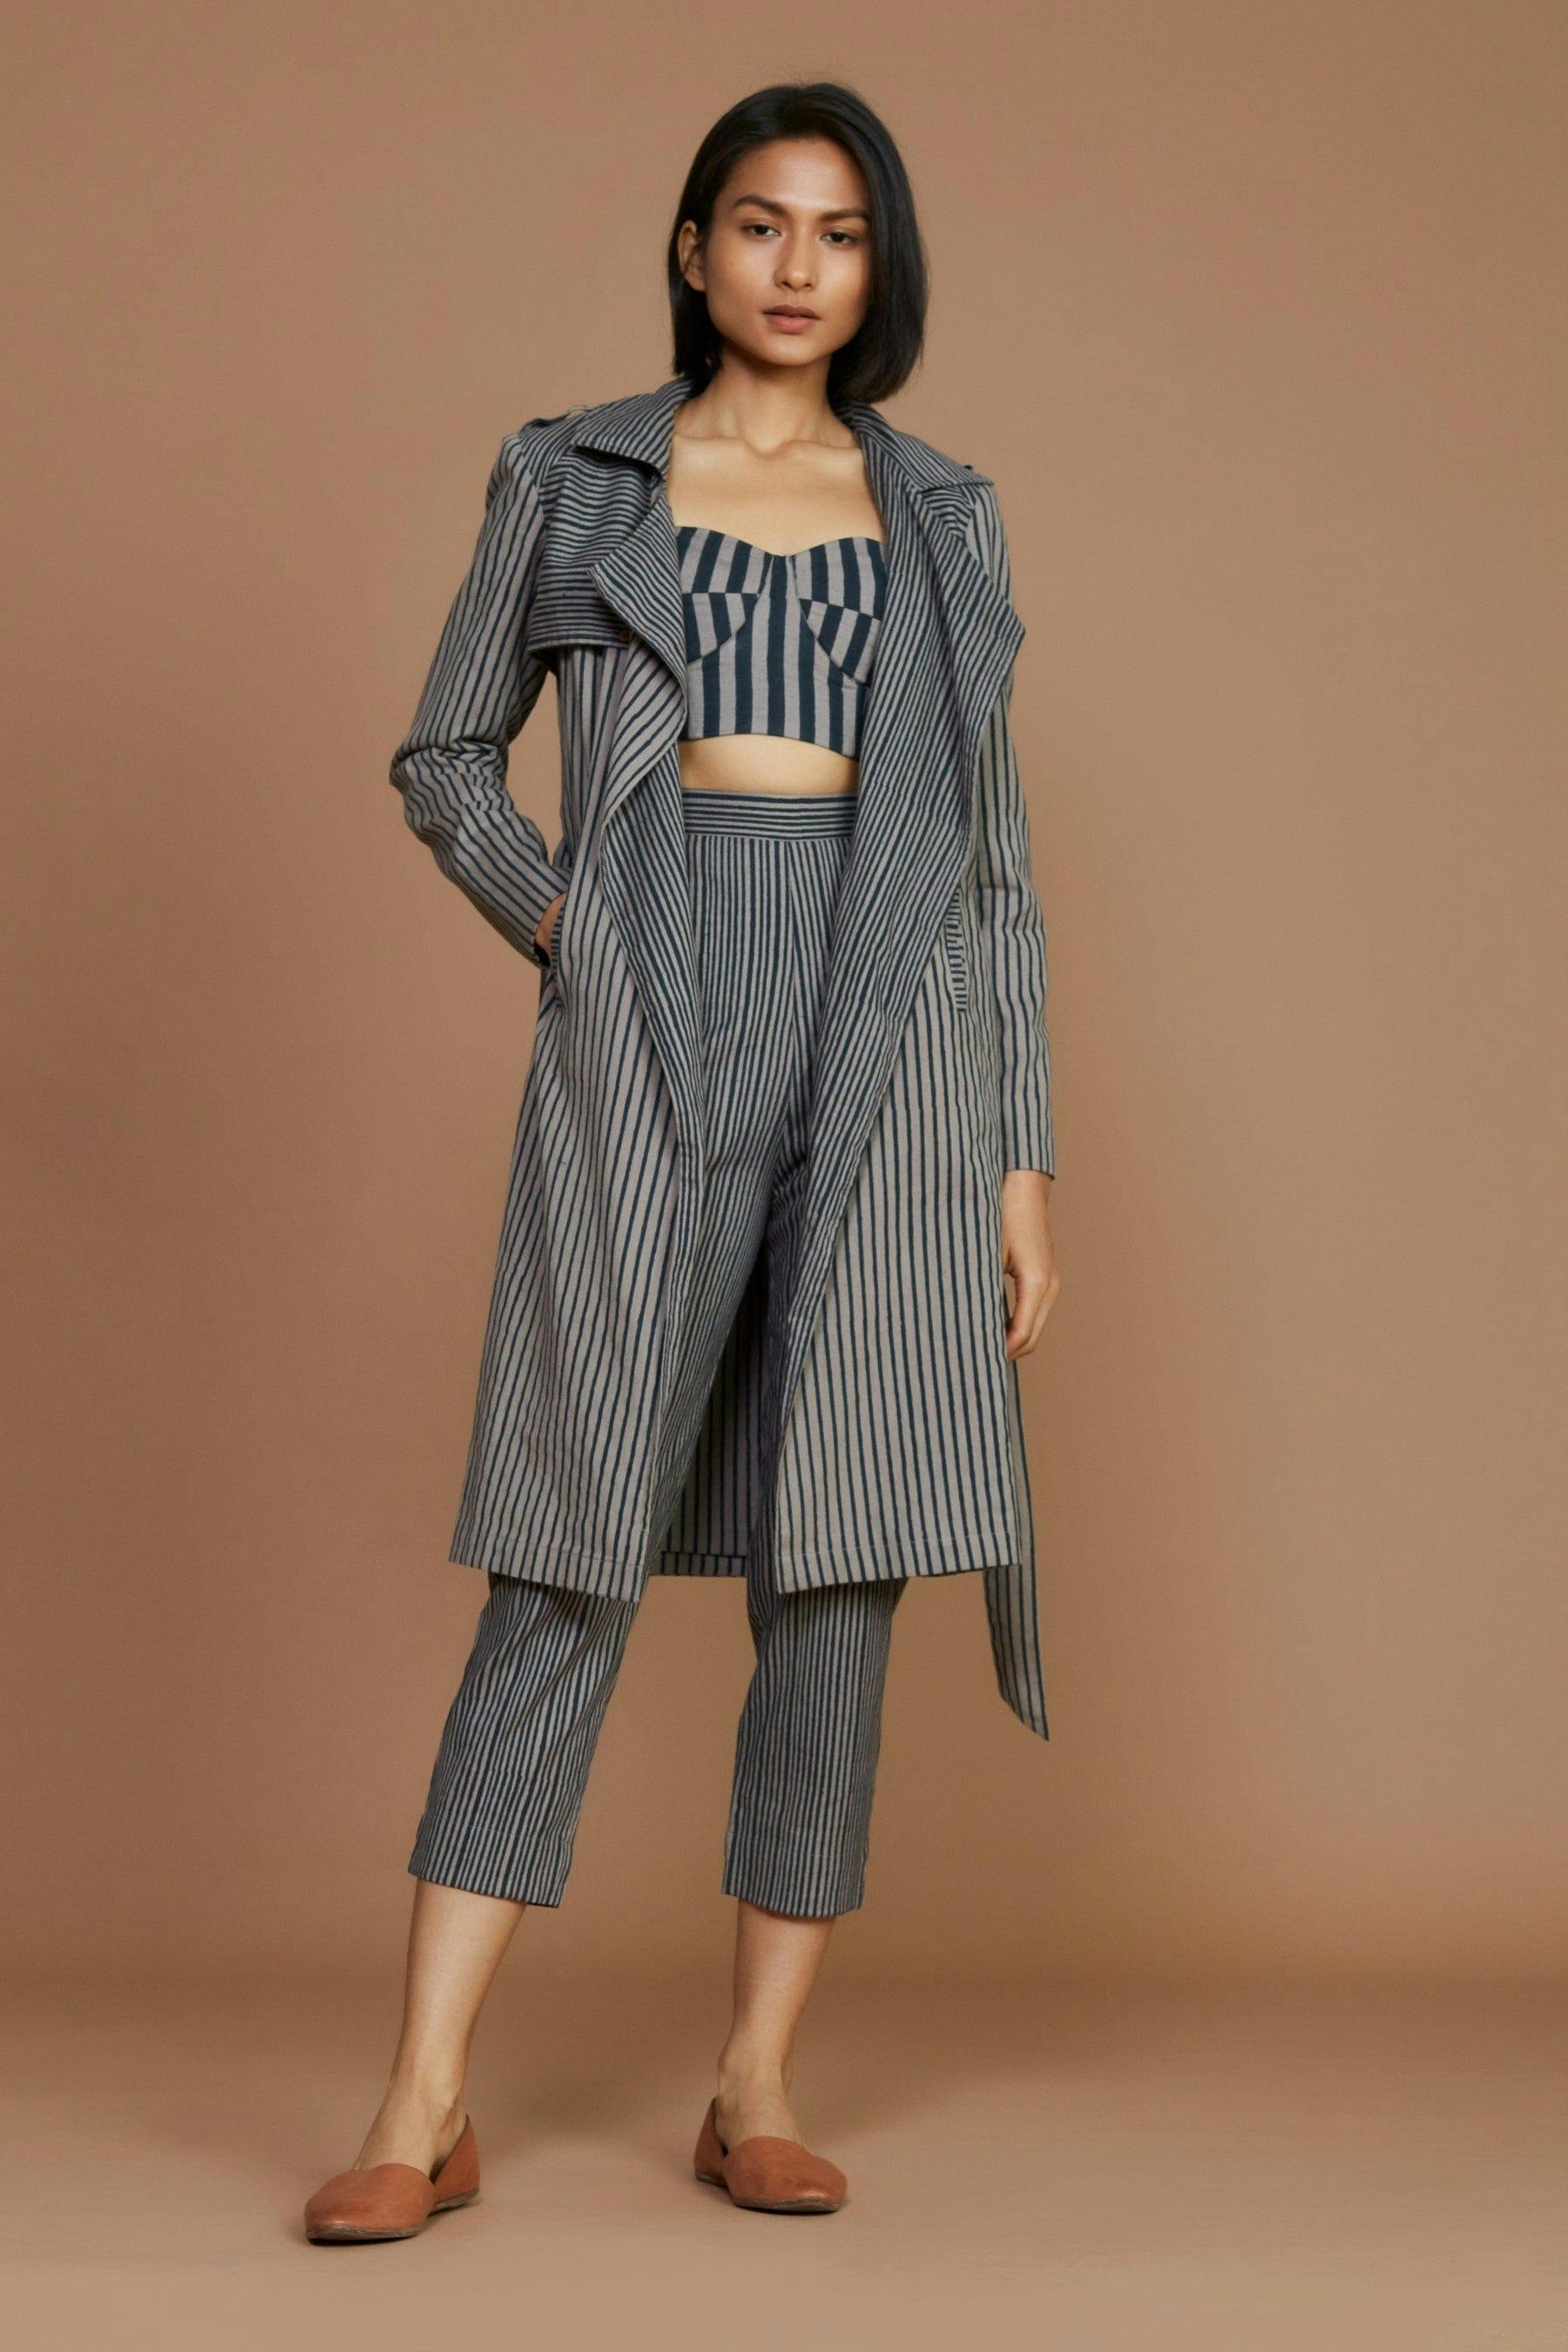 Grey with Charcoal Striped Trench & Corset Co-Ord Set (3 PCS), a product by Style Mati